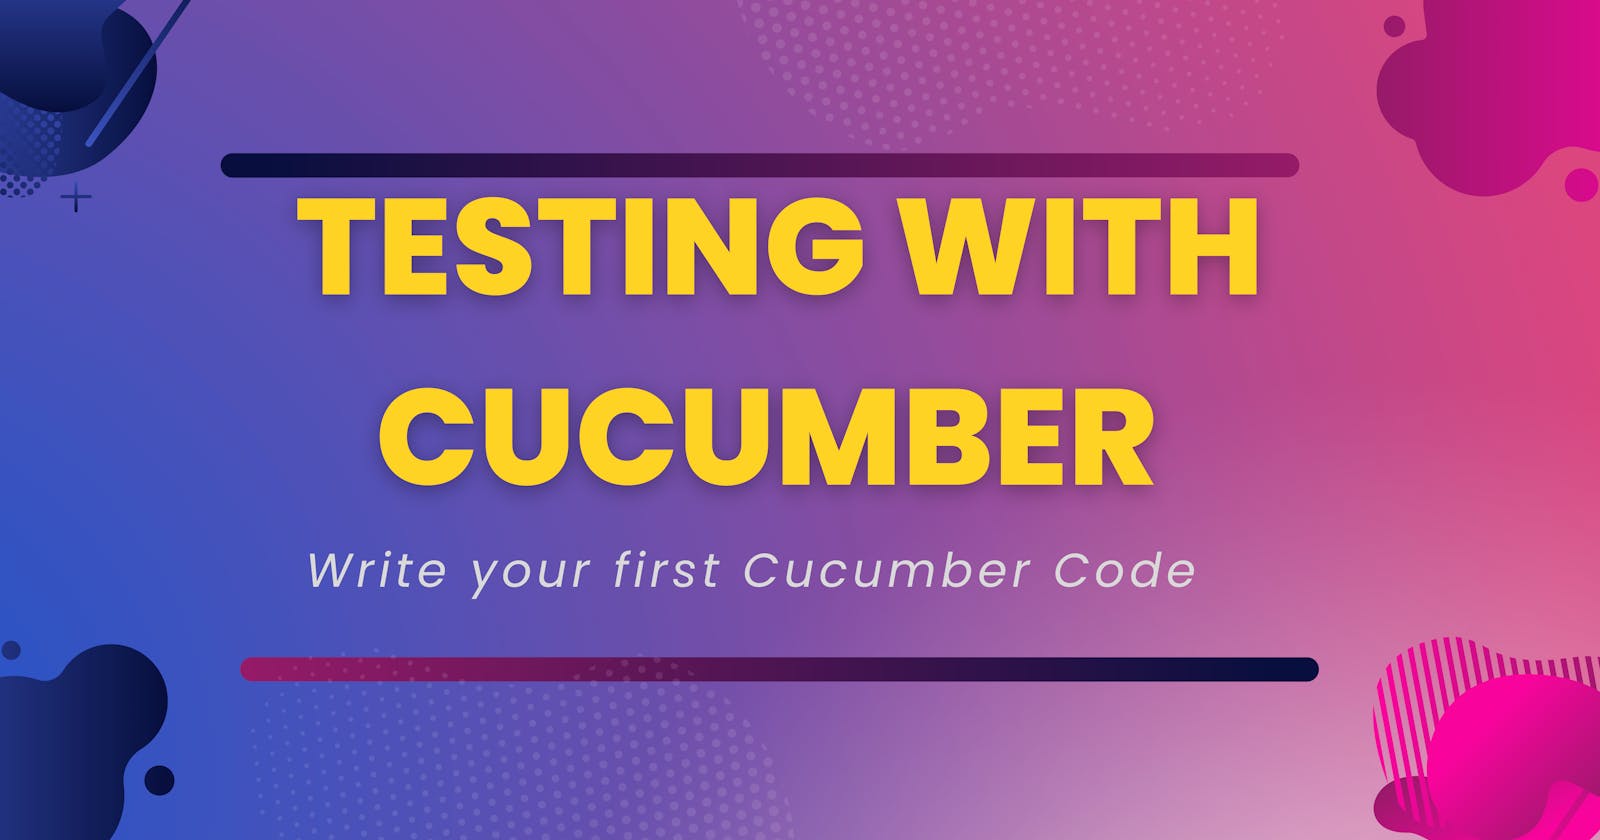 Write your first Cucumber Code